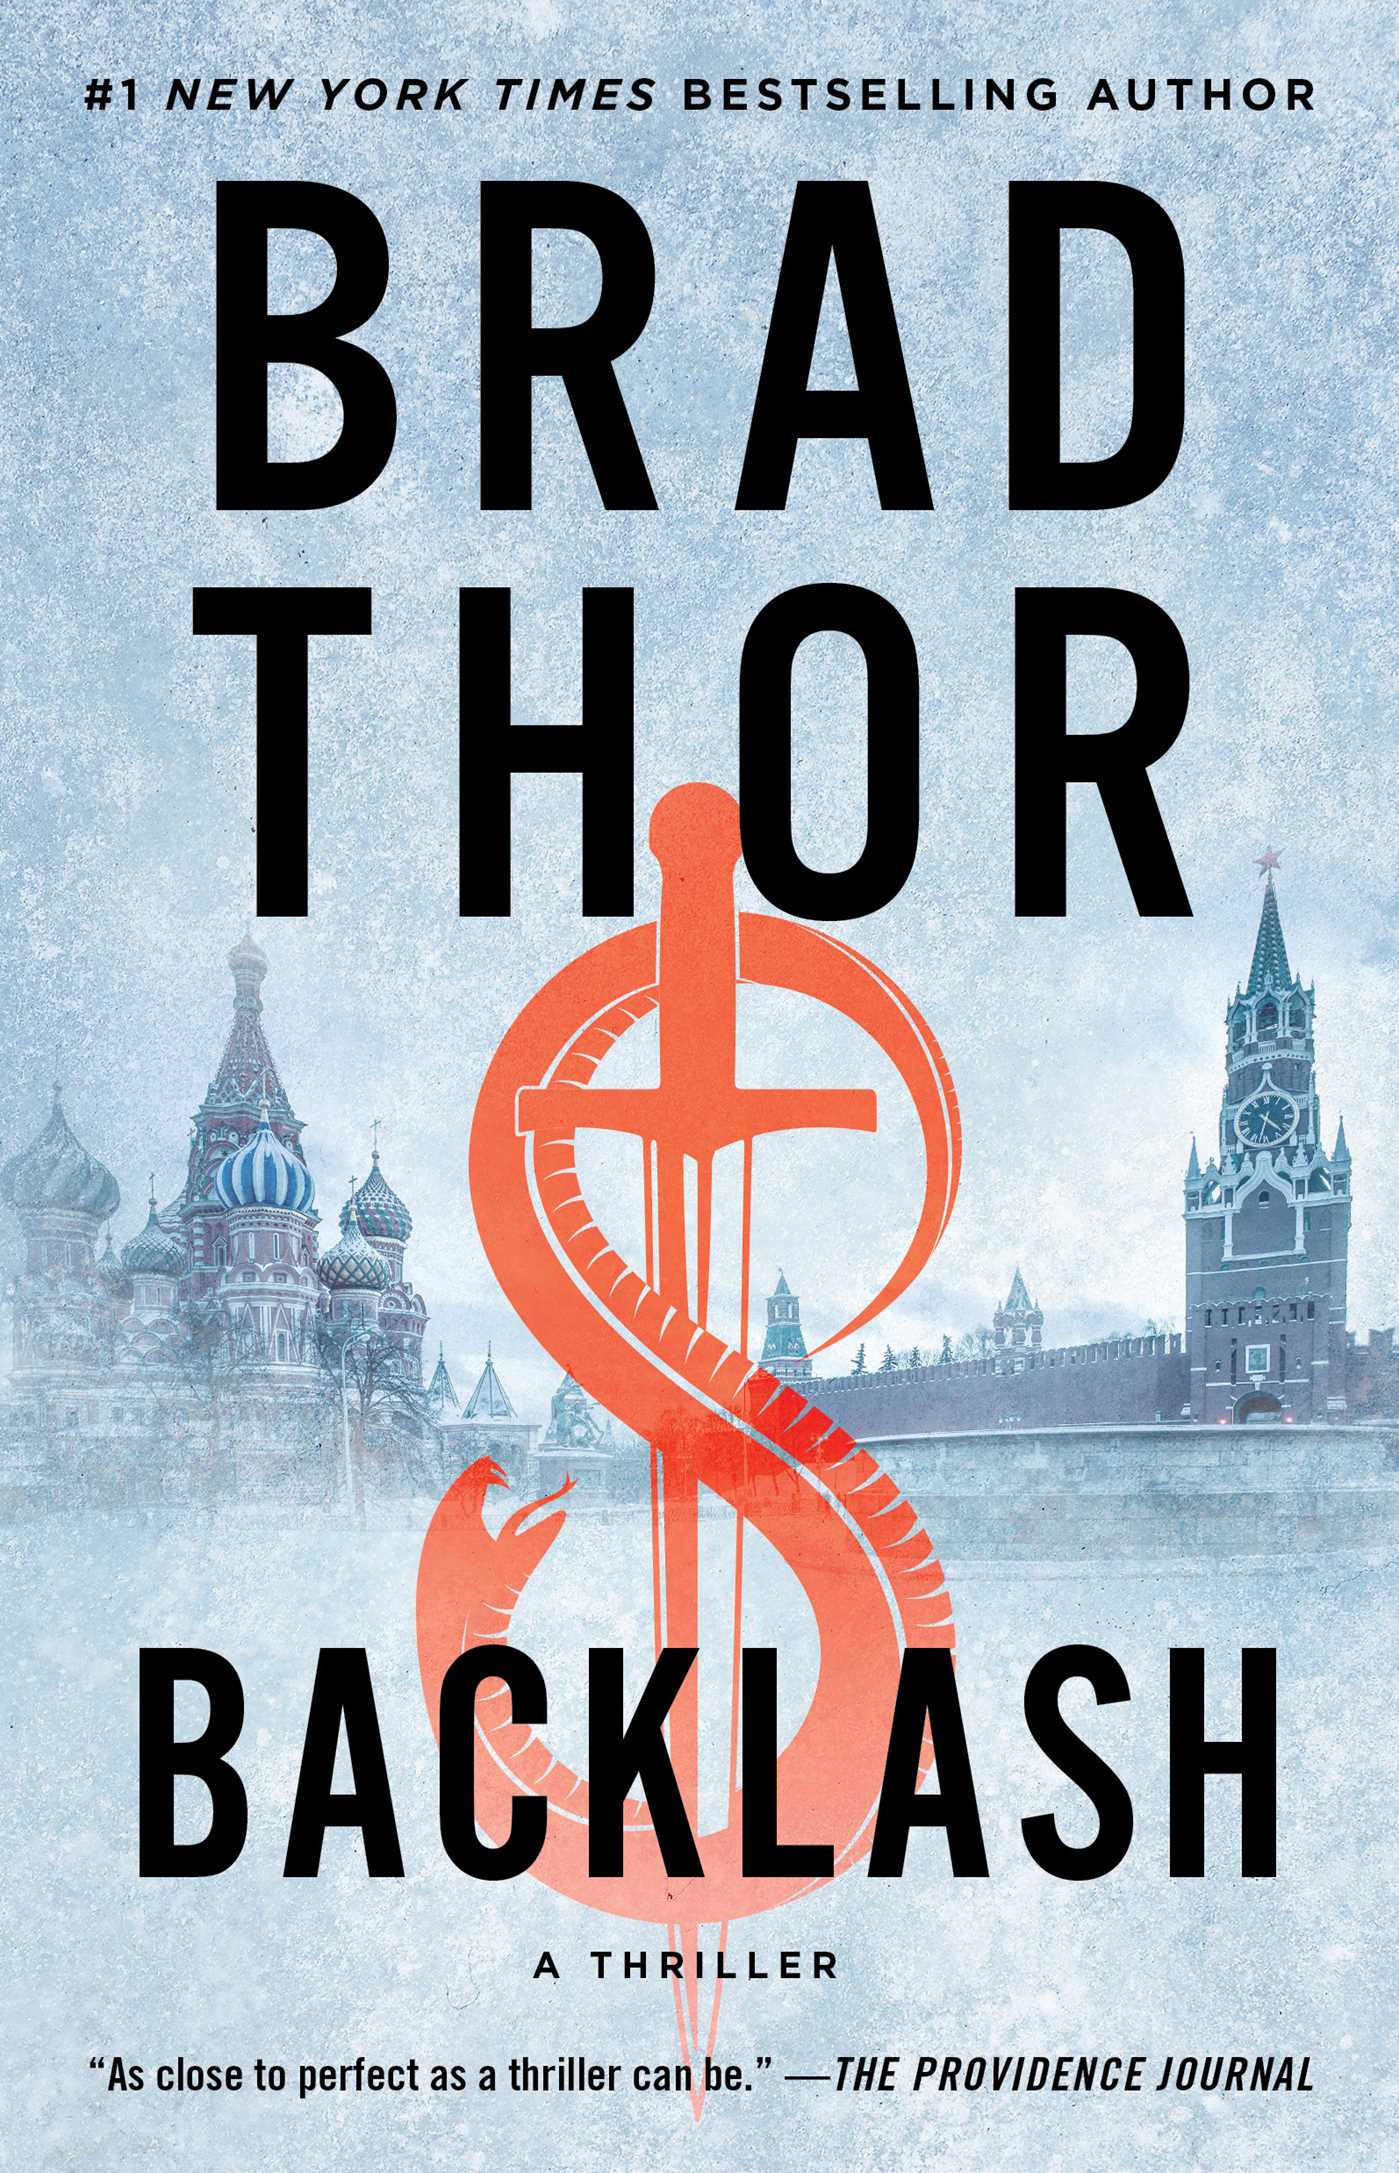 Cover Image of Backlash